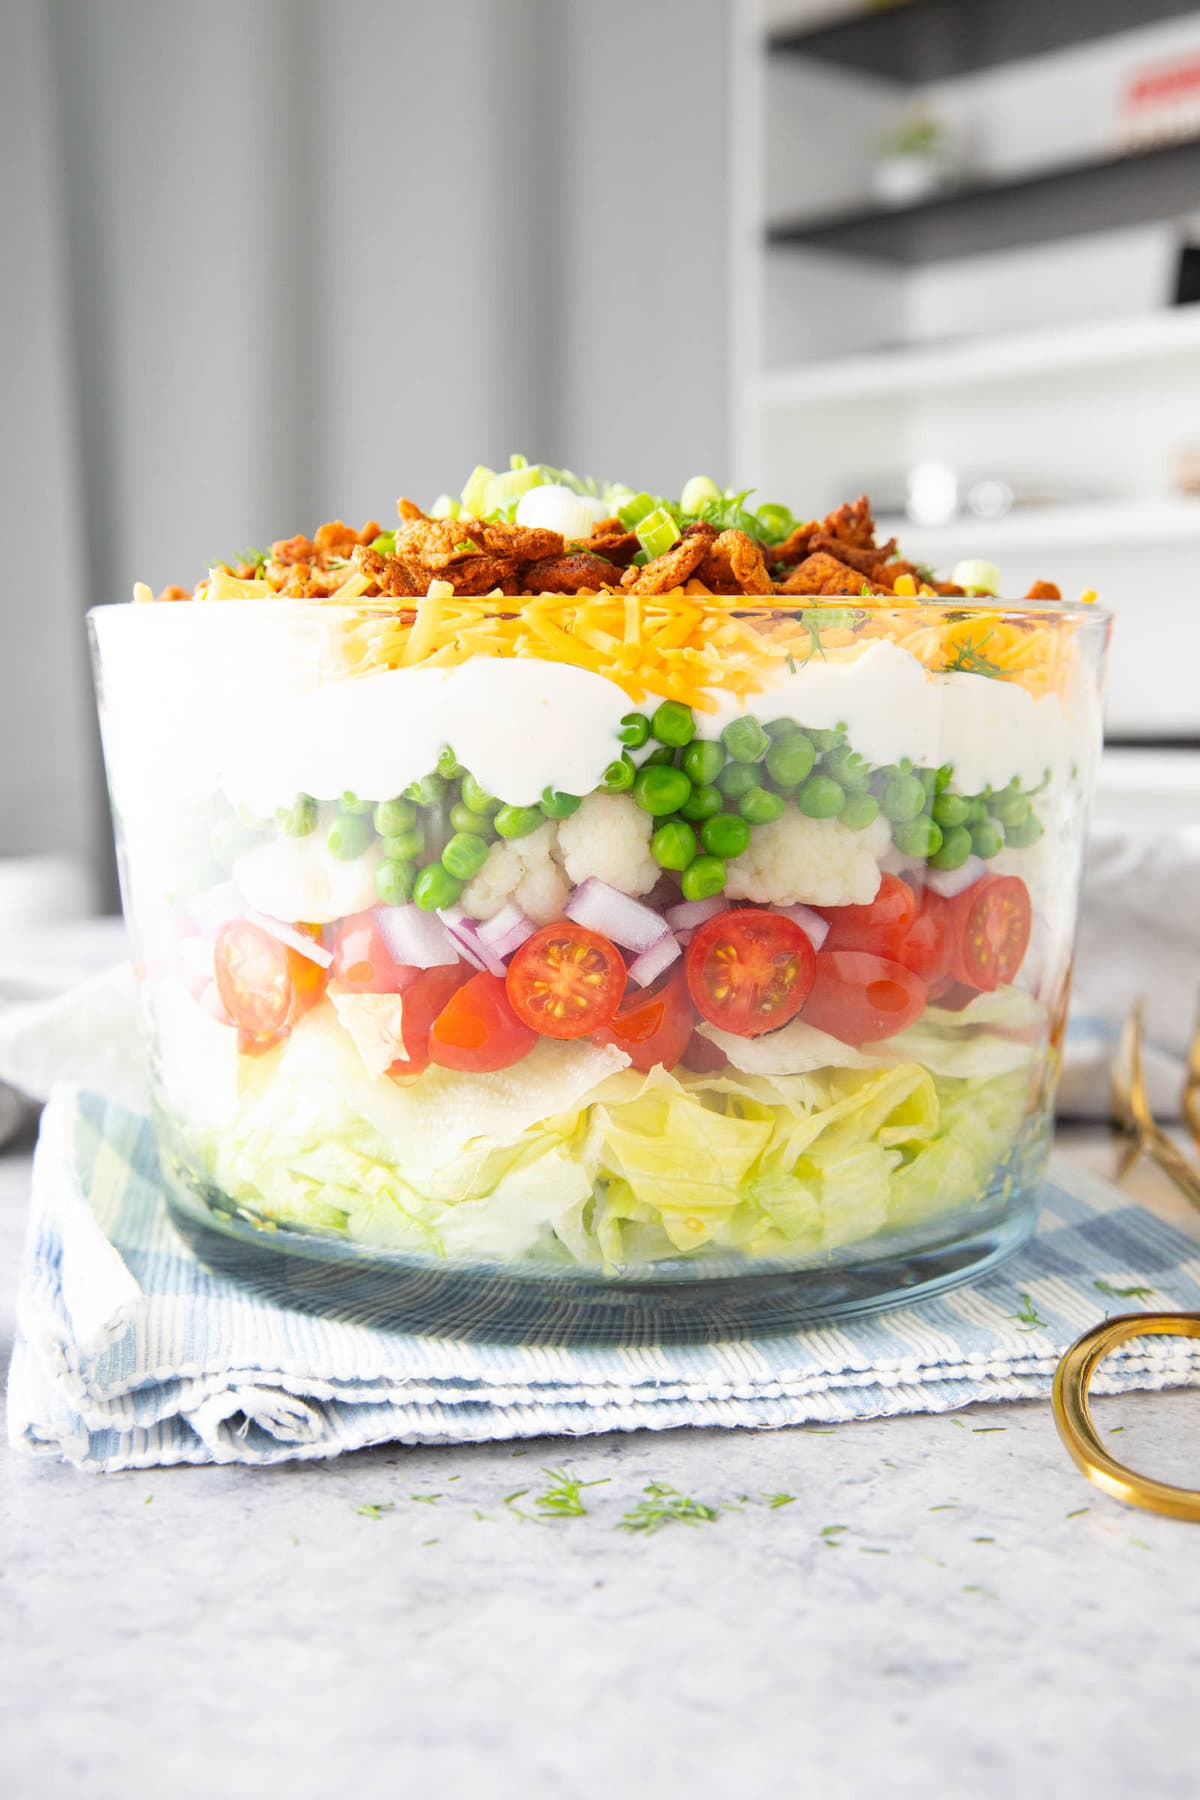 7 Layer Salad prepared in a trifle glass bowl with layers of tomatoes, peas, onions, dressing and more.